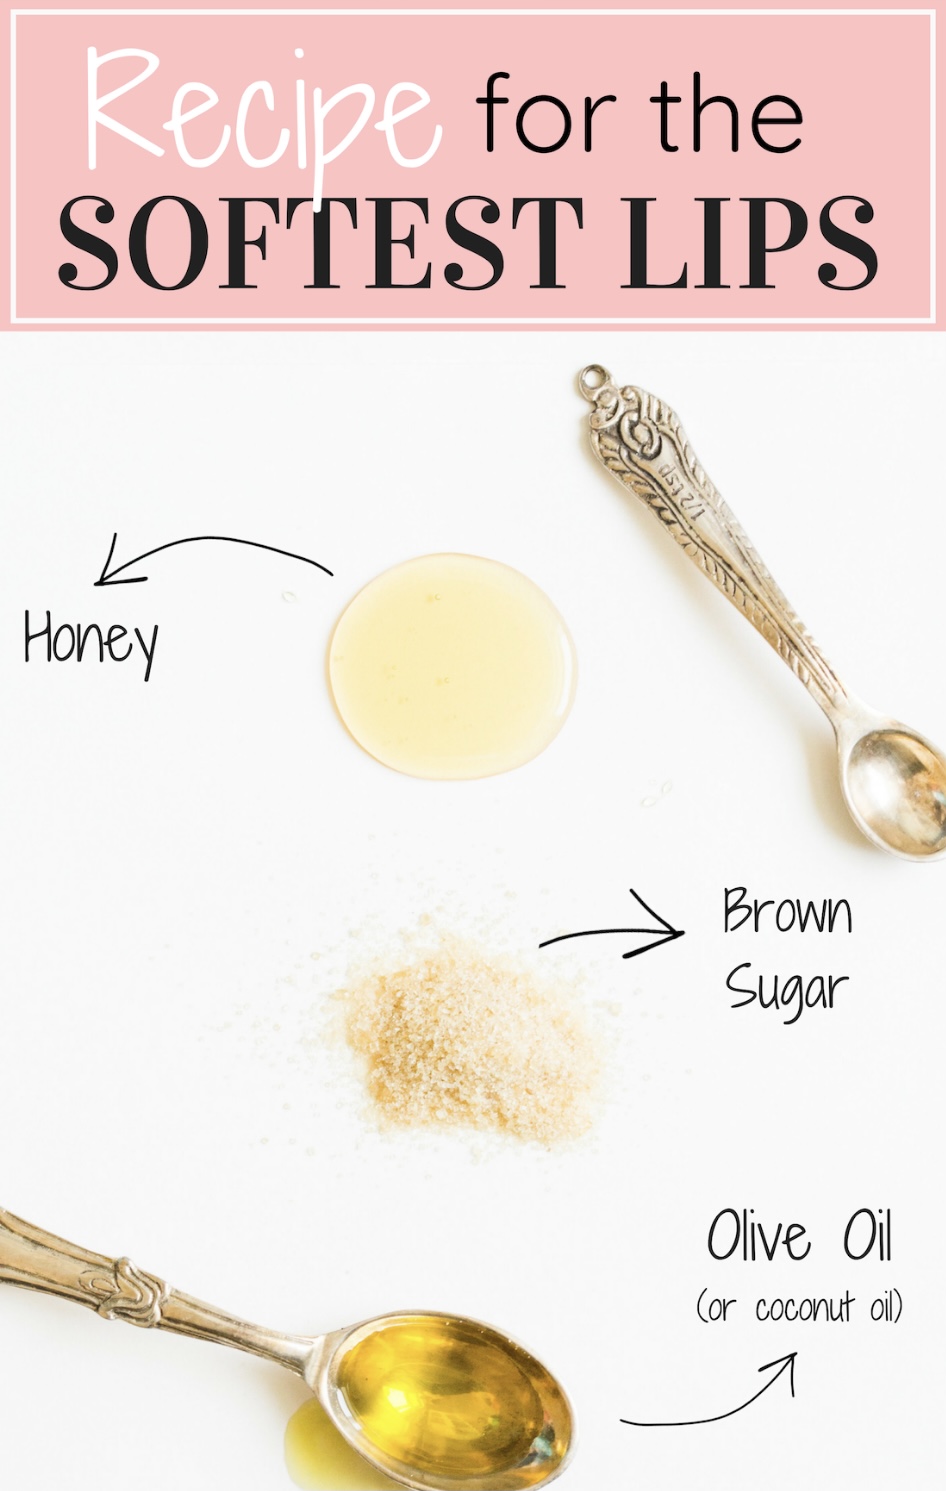 Did you know exfoliating your lips is super important for maintaining healthy, smooth, rosy lips? Make your own easy DIY glittering lip scrub using things you already have in your kitchen, for perfectly polished pout in every season. | @glitterinclexi | GLITTERINC.COM